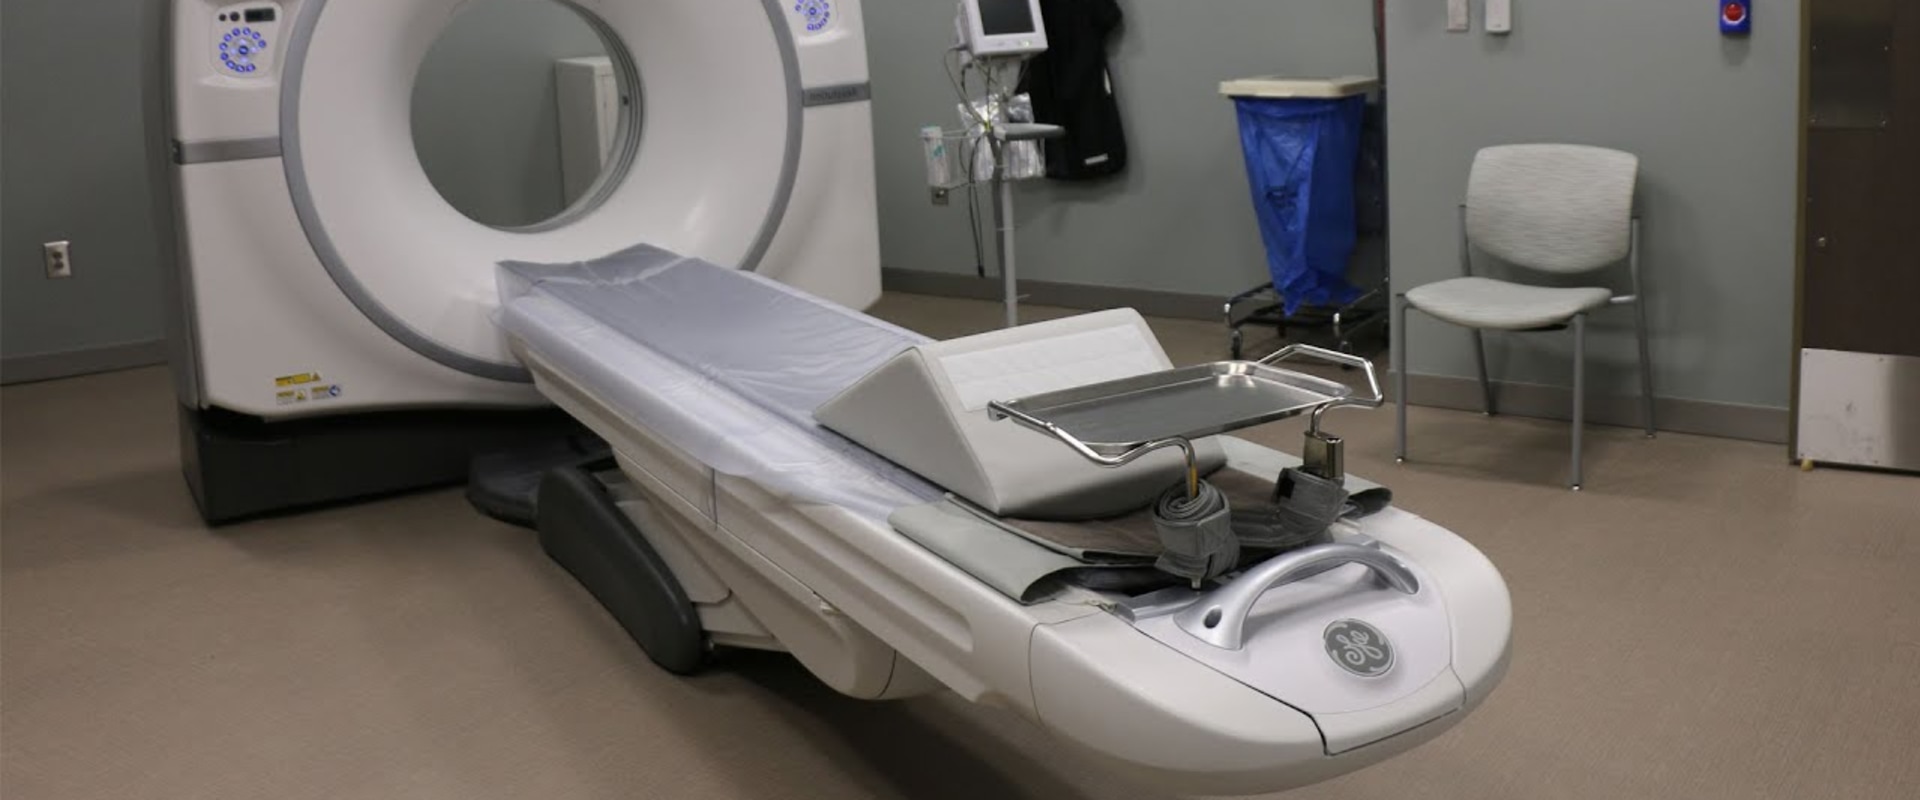 What Quality of Imaging Equipment is Used in Franklin, Tennessee Radiology Centers?